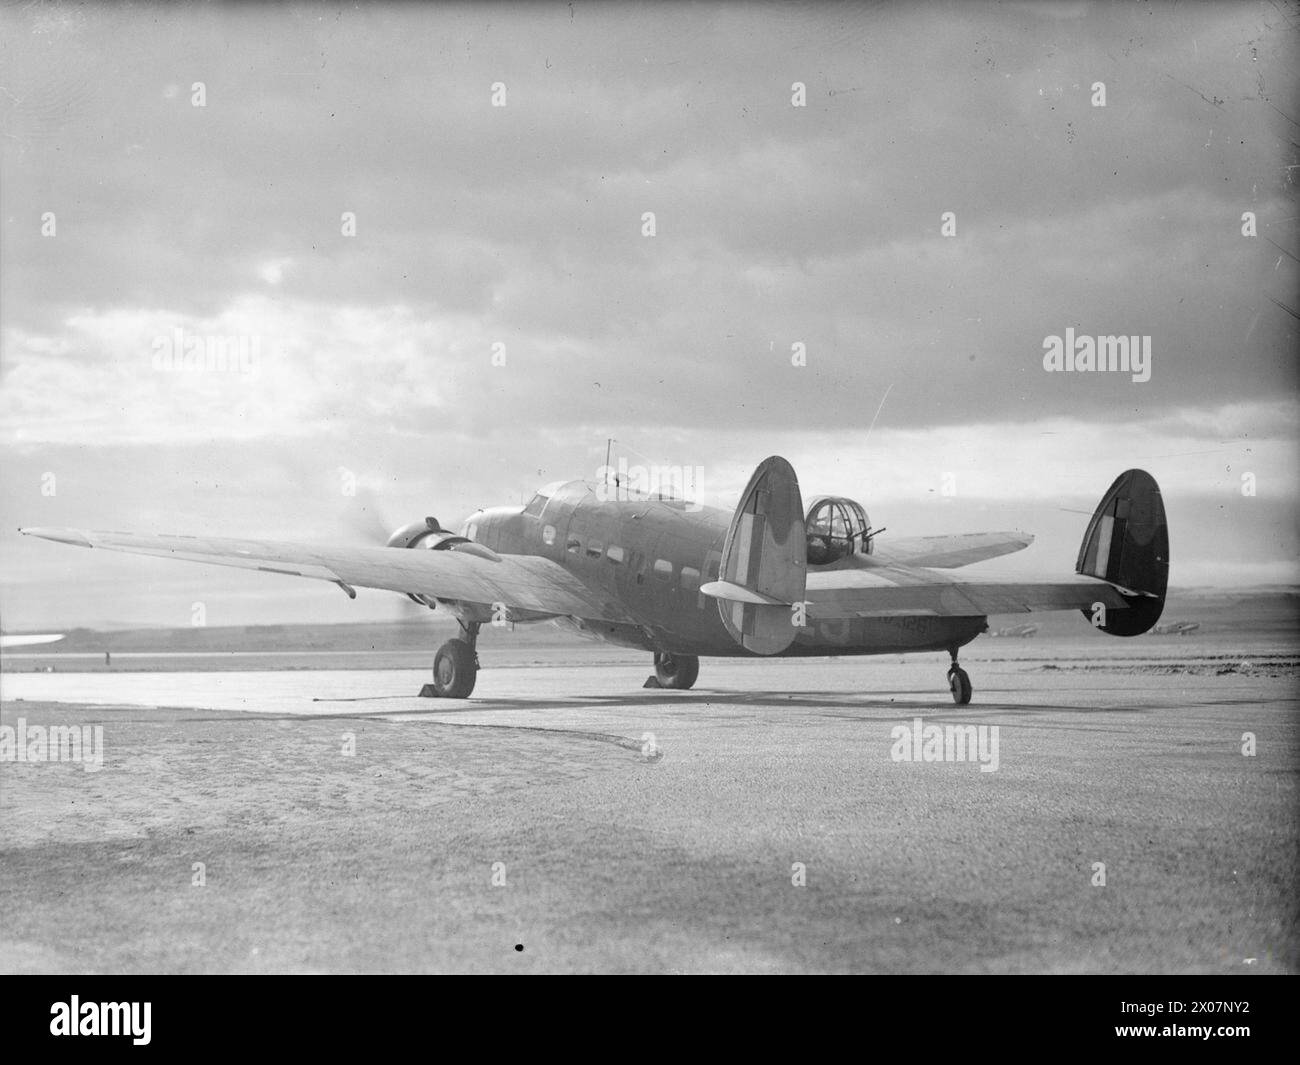 AMERICAN AIRCRAFT IN RAF SERVICE 1939-1945: LOCKHEED L-214 & L-414 HUDSON. - Hudson Mark I, N7326 ZS-F, of No. 233 Squadron RAF based at Aldergrove, County Antrim, preparing to take off from Leuchars, Fife  Royal Air Force, Maintenance Unit, 235 Stock Photo